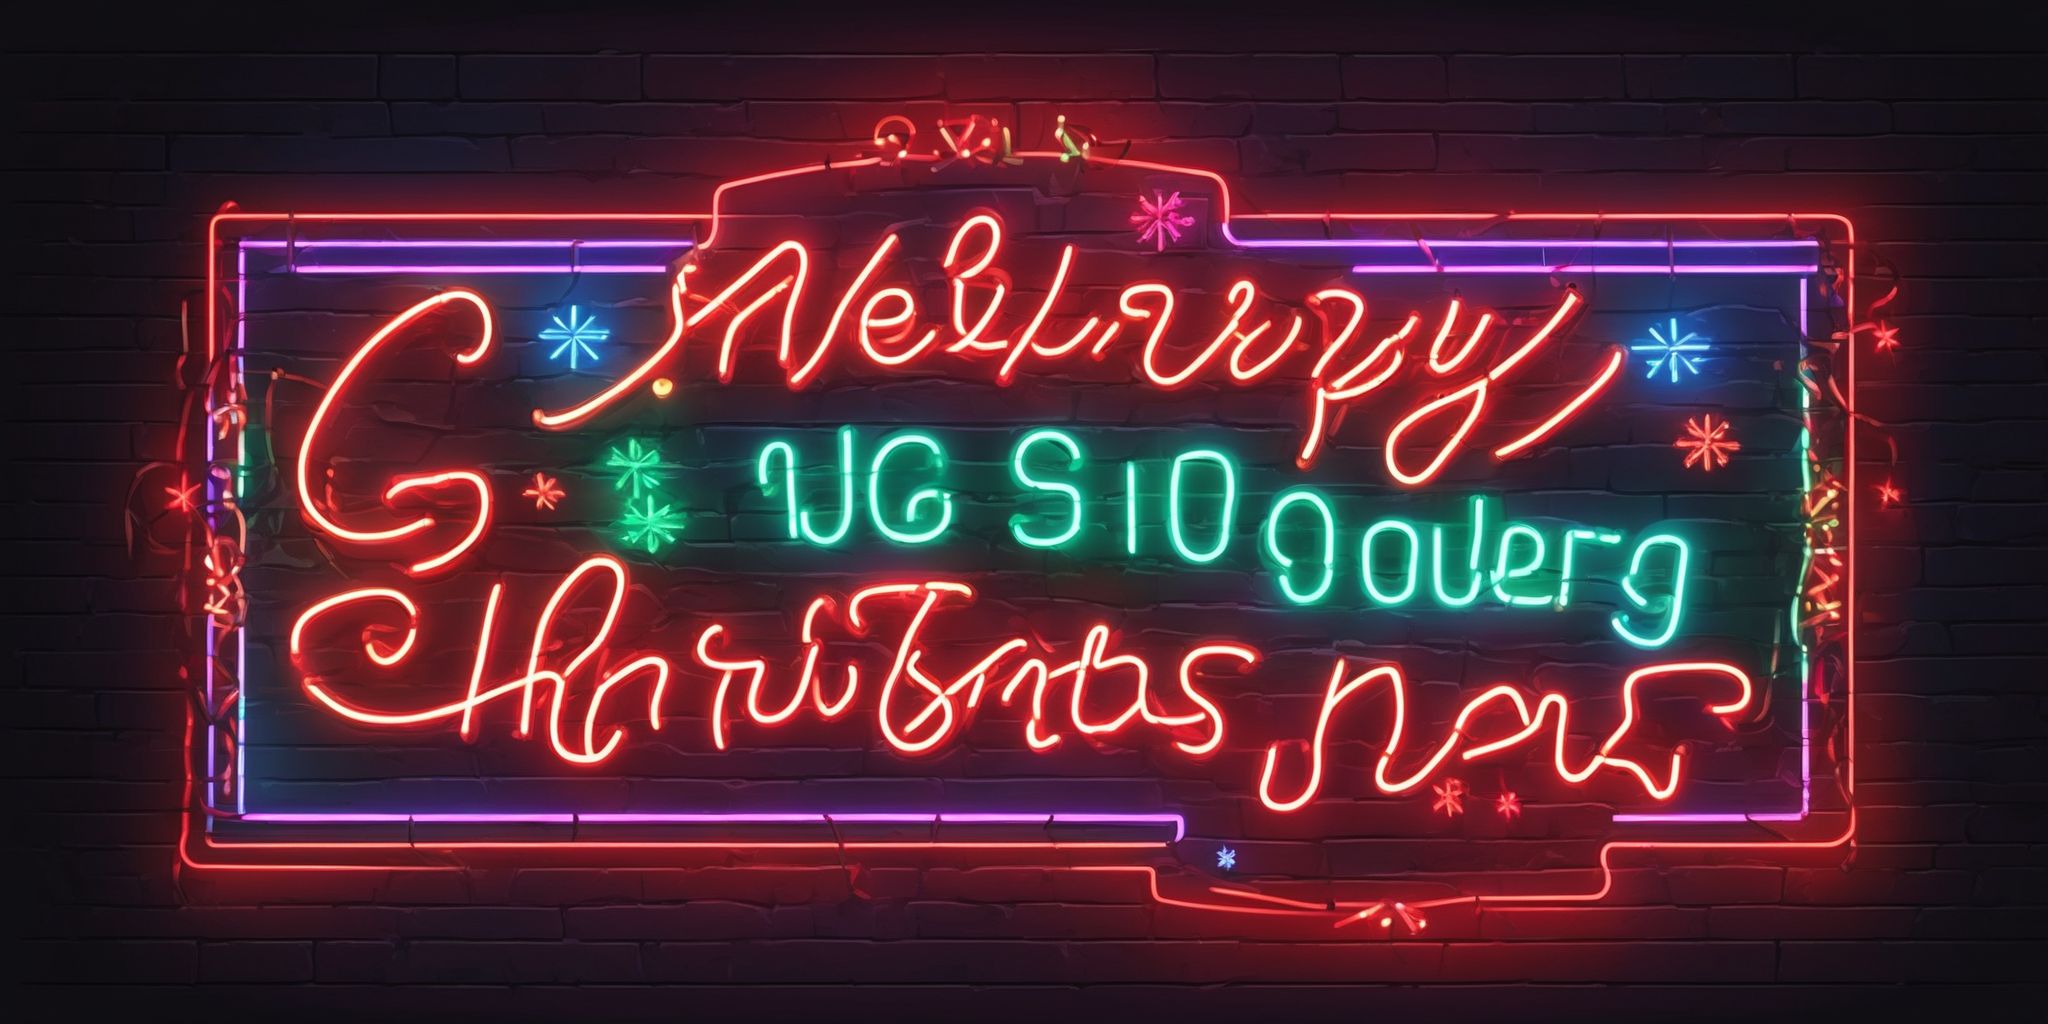 Neon sign in realistic Christmas style